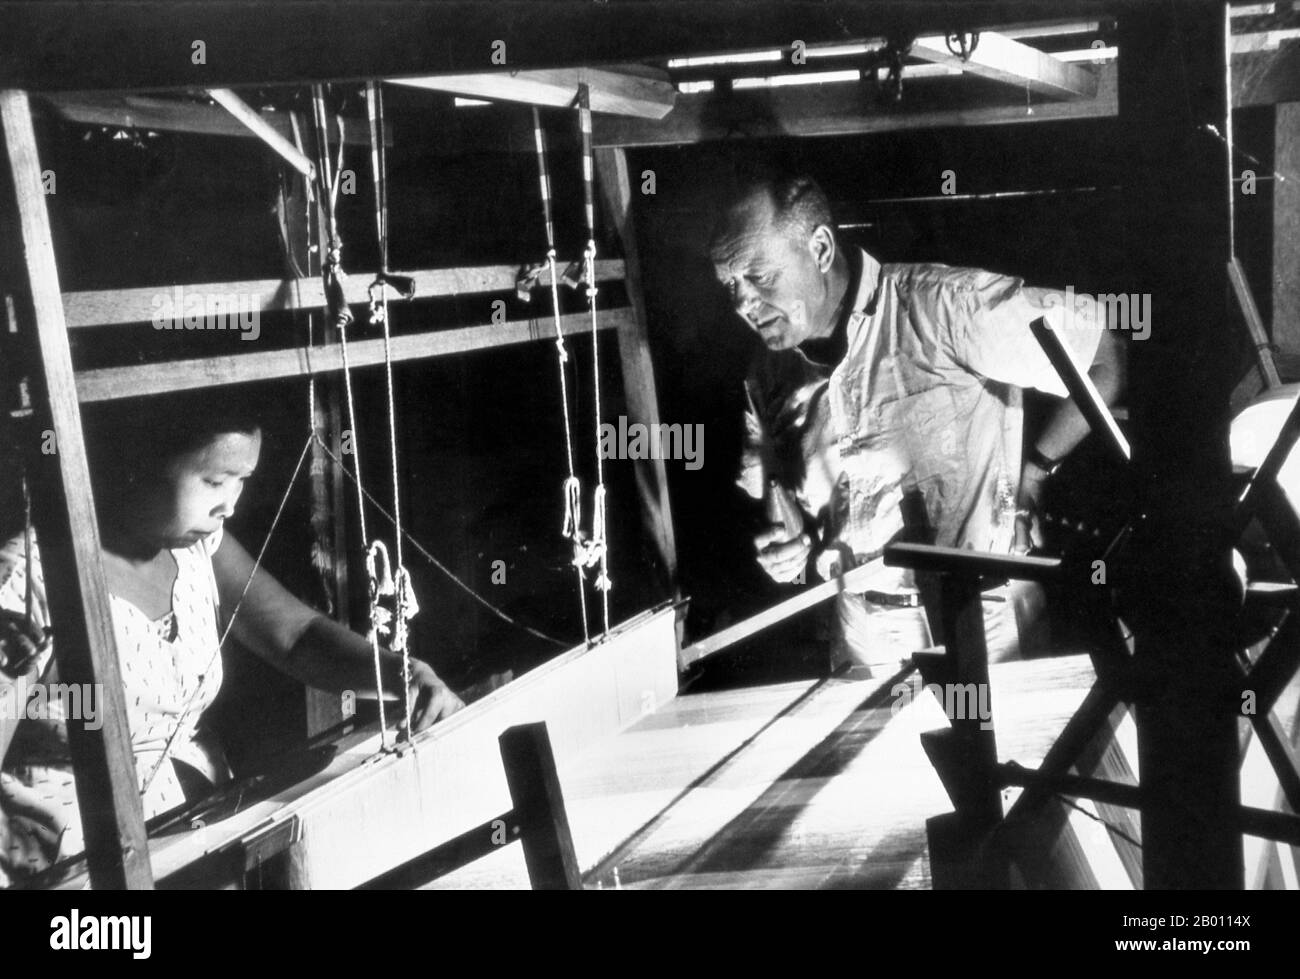 Thailand: Jim Thompson watching a Cham silk weaver, Bangkok, early 1960s.  James (Jim) Harrison Wilson Thompson (born March 21, 1906 in Greenville, Delaware - unknown) was an American businessman who helped revitalize the Thai silk industry in the 1950s and 1960s. A former U.S. military intelligence officer, Thompson mysteriously disappeared from Malaysia's Cameron Highlands while going for a walk on Easter Sunday, March 26, 1967. Stock Photo